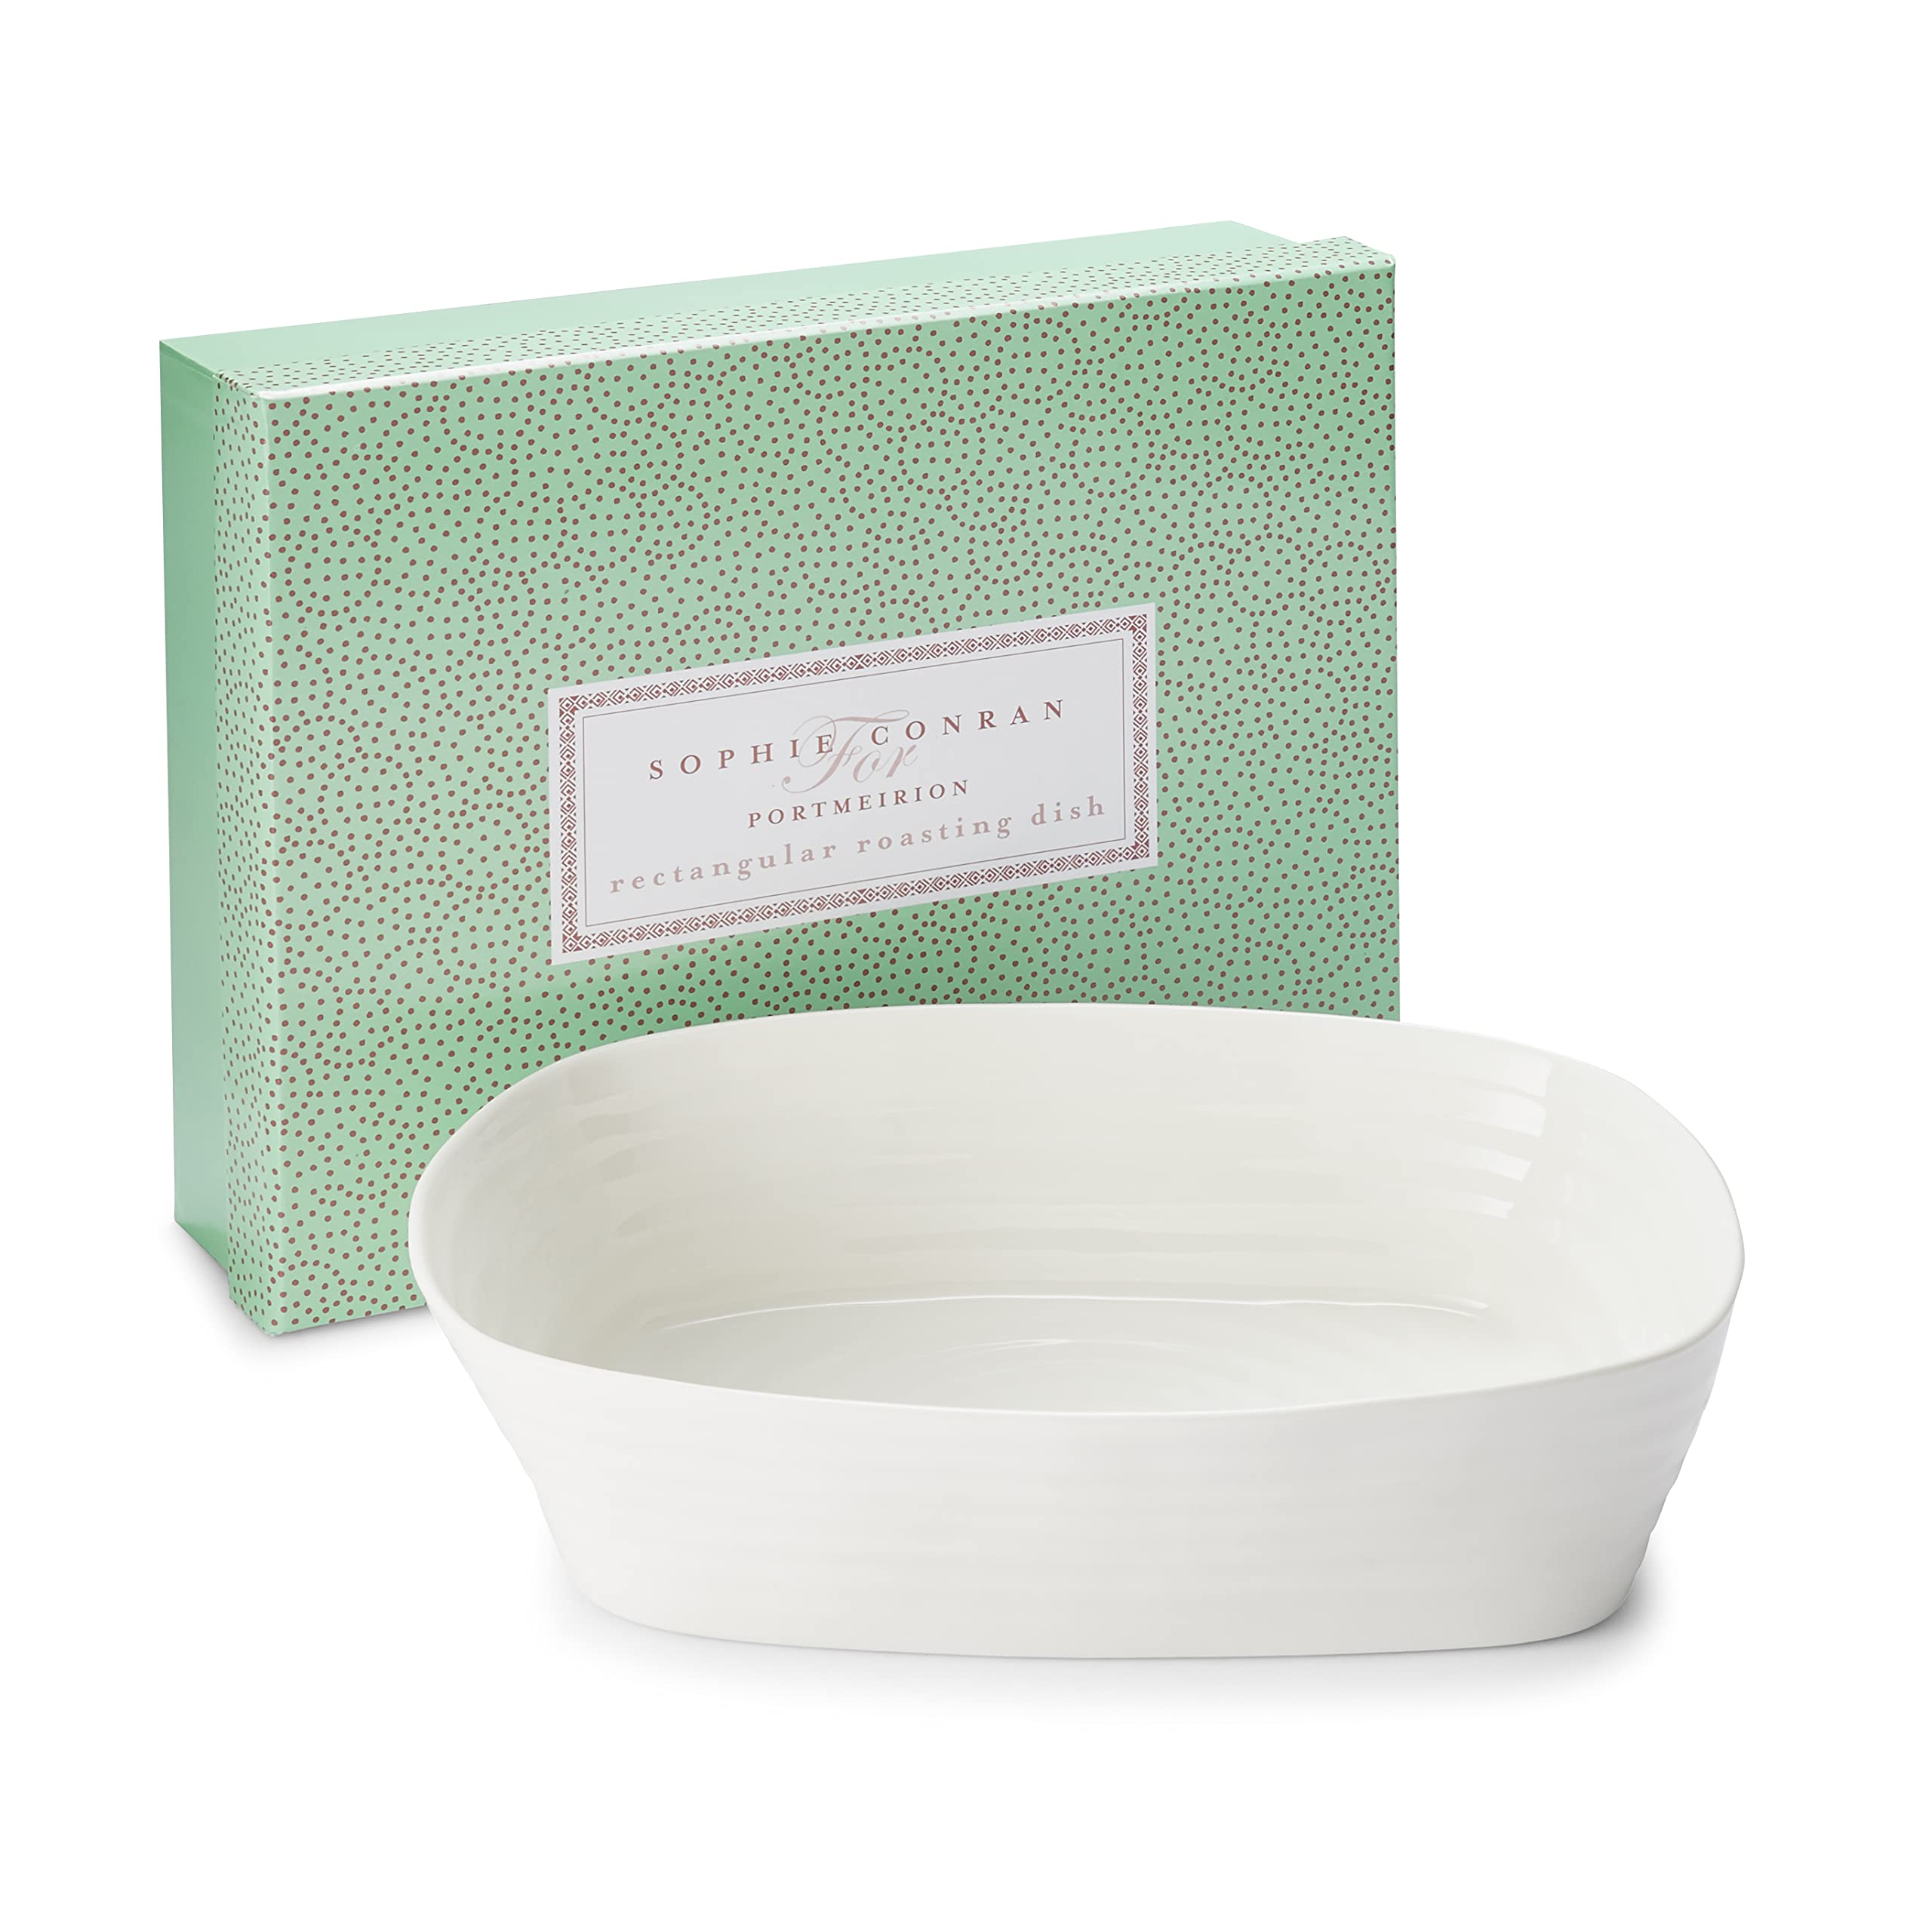 Portmeirion Sophie Conran White Lasagna Pan/Roaster | Rectangular Casserole Dish for Oven | 11.5 x 9.5 Inch | Made from Fine Porcelain | Dishwasher and Microwave Safe